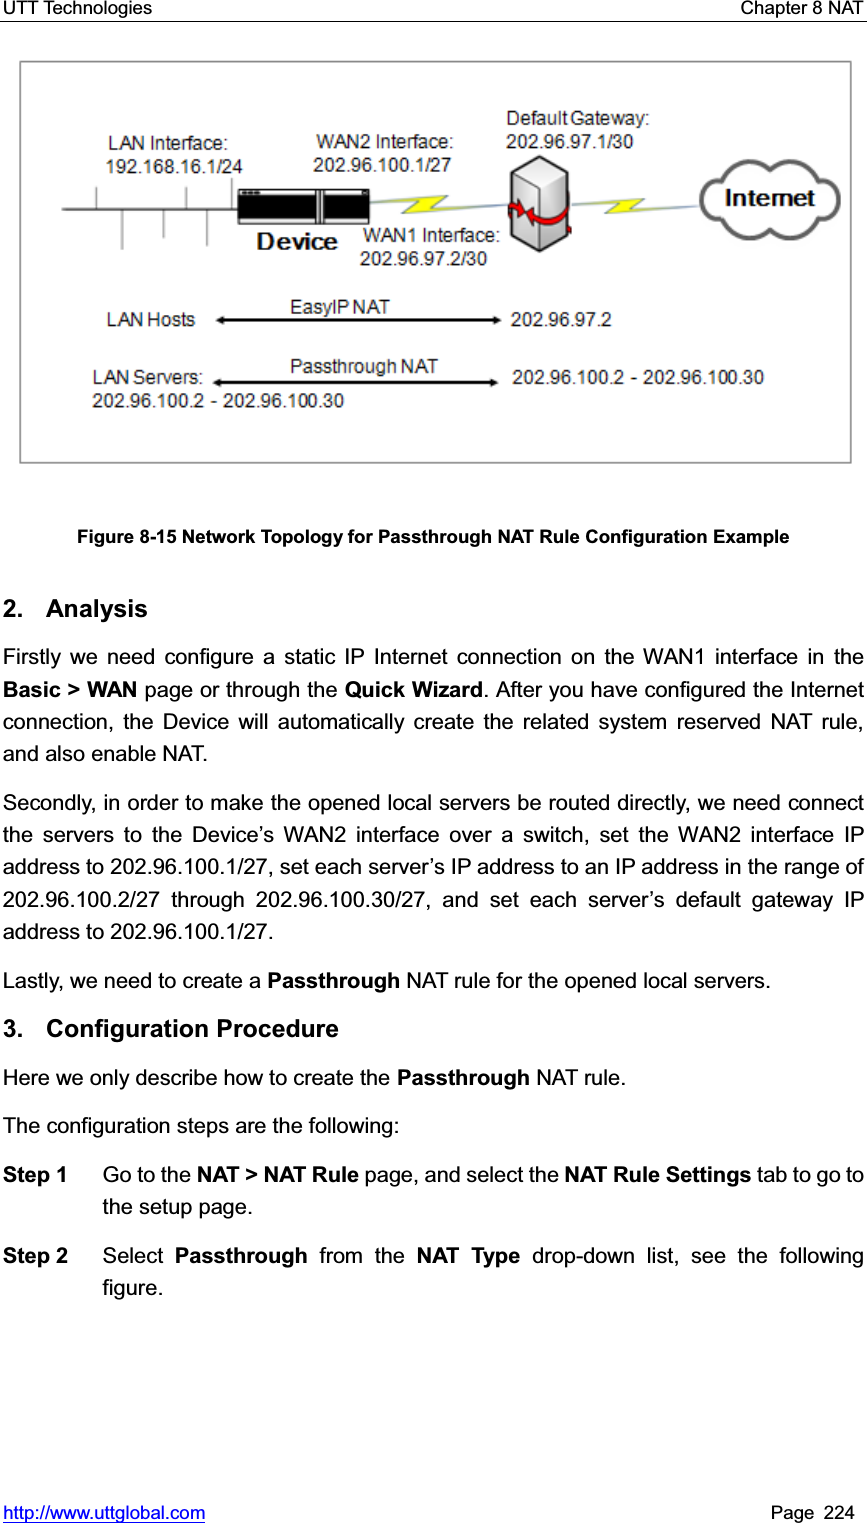 UTT Technologies    Chapter 8 NAT   http://www.uttglobal.com Page 224 Figure 8-15 Network Topology for Passthrough NAT Rule Configuration Example 2. Analysis Firstly we need configure a static IP Internet connection on the WAN1 interface in theBasic &gt; WAN page or through the Quick Wizard. After you have configured the Internet connection, the Device will automatically create the related system reserved NAT rule, and also enable NAT. Secondly, in order to make the opened local servers be routed directly, we need connect the servers to the Device¶s WAN2 interface over a switch, set the WAN2 interface IP address to 202.96.100.1/27, set each server¶s IP address to an IP address in the range of 202.96.100.2/27 through 202.96.100.30/27, and set each server¶s default gateway IP address to 202.96.100.1/27. Lastly, we need to create a Passthrough NAT rule for the opened local servers. 3. Configuration Procedure Here we only describe how to create the Passthrough NAT rule.   The configuration steps are the following:   Step 1  Go to the NAT &gt; NAT Rule page, and select the NAT Rule Settings tab to go to the setup page. Step 2  Select  Passthrough  from the NAT Type drop-down list, see the following figure. 